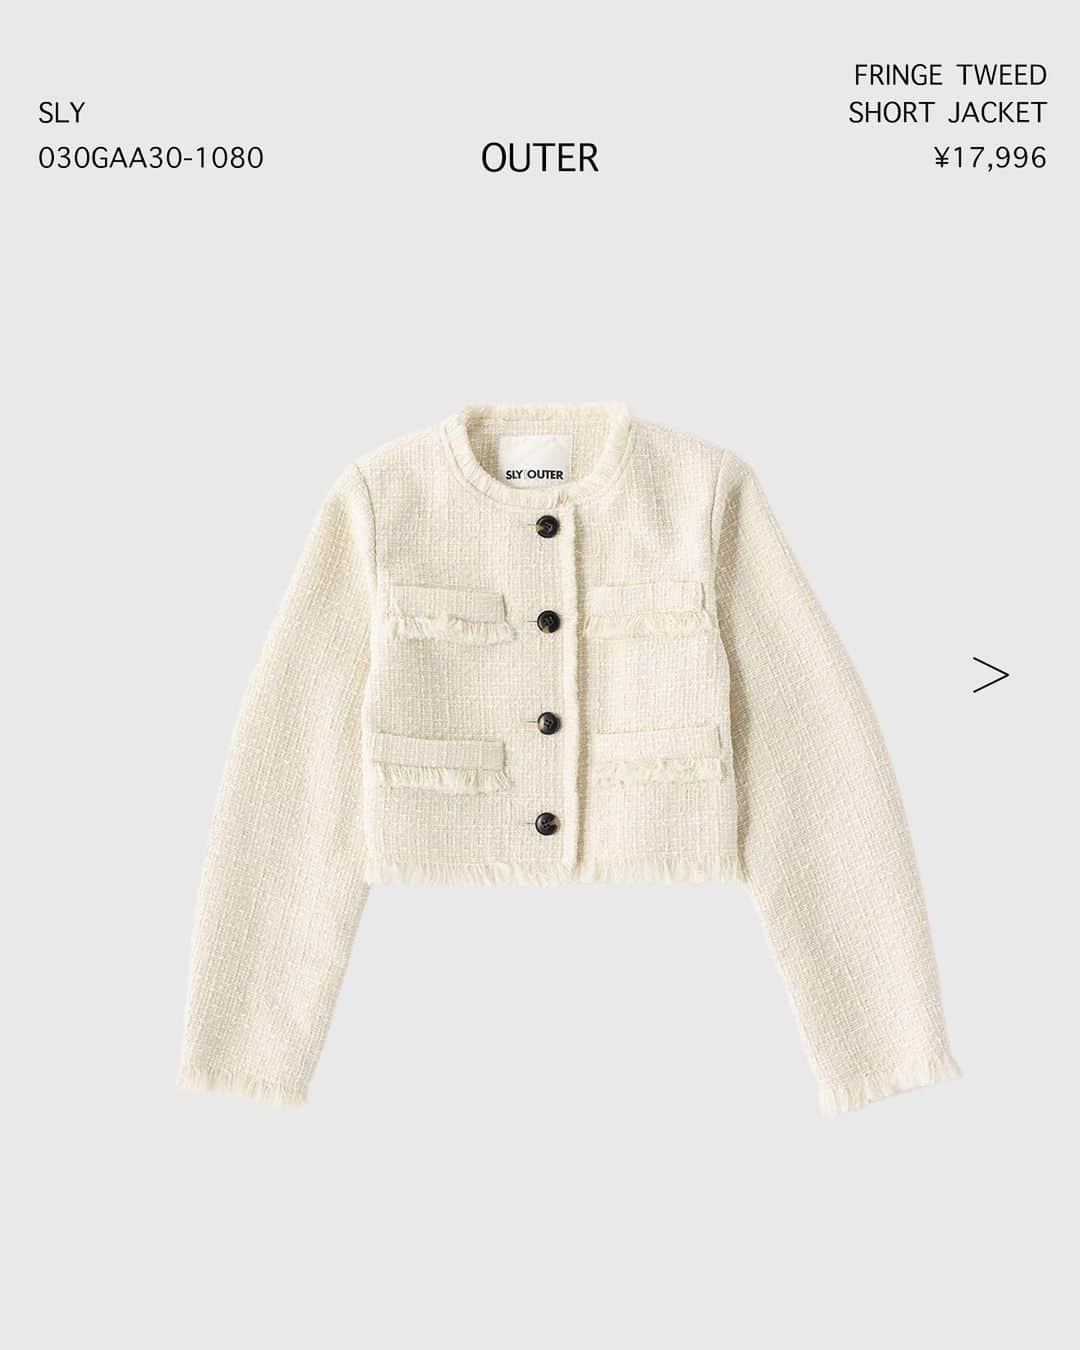 SHEL'TTER WEB STOREさんのインスタグラム写真 - (SHEL'TTER WEB STOREInstagram)「【NEW IN】 - OUTER -  ━━━━━━━━━━━━━━━━  【MOUSSY】FAUX LEATHER DETACHABLE ジャケット ¥22,990 tax in Size：1,2 Color：BLK,D/BRN,L/BEG No：010GAG30-5160 ※発売中  【SLY】REVERSE SEAM ZIP CROP SW トップス ¥6,996 tax in Size：FREE Color：O/WHT,BLK,BRN No：030GAY80-2260 ※発売中  【SLY】FRINGE TWEED ベスト ¥15,994 tax in Size：FREE Color：Multi,IVOY,BLK No：030GAA30-1090 ※発売中  【SLY】FRINGE TWEED SHORT ジャケット ¥17,996 tax in Size：FREE Color：IVOY,BLK,Multi No：030GAA30-1080 ※発売中  【SLY】WASHABLE HG V／N CROP カーディガン ¥7,700 tax in Size：FREE Color：BLU,IVOY,BLK,LIME,D/BRN,T.GRY No：030GAY70-1540 ※発売中  気になるアイテムは画像をタップまたは  プロフィールのサイトURLをクリック✔  ━━━━━━━━━━━━━━━━  #SHELTTERWEBSTORE #SWS #MOUSSY #SLY  #newin #2023AW #autumn2023 #leatherjacket #cropped #tweedjacket #cardigan #shortjacket  #新作 #アウター #ジャケット #レザージャケット #クロップド丈 #ショートジャケット #ツイードジャケット #カーディガン #ベスト #ツイード #スウェット」9月21日 20時28分 - sheltterwebstore